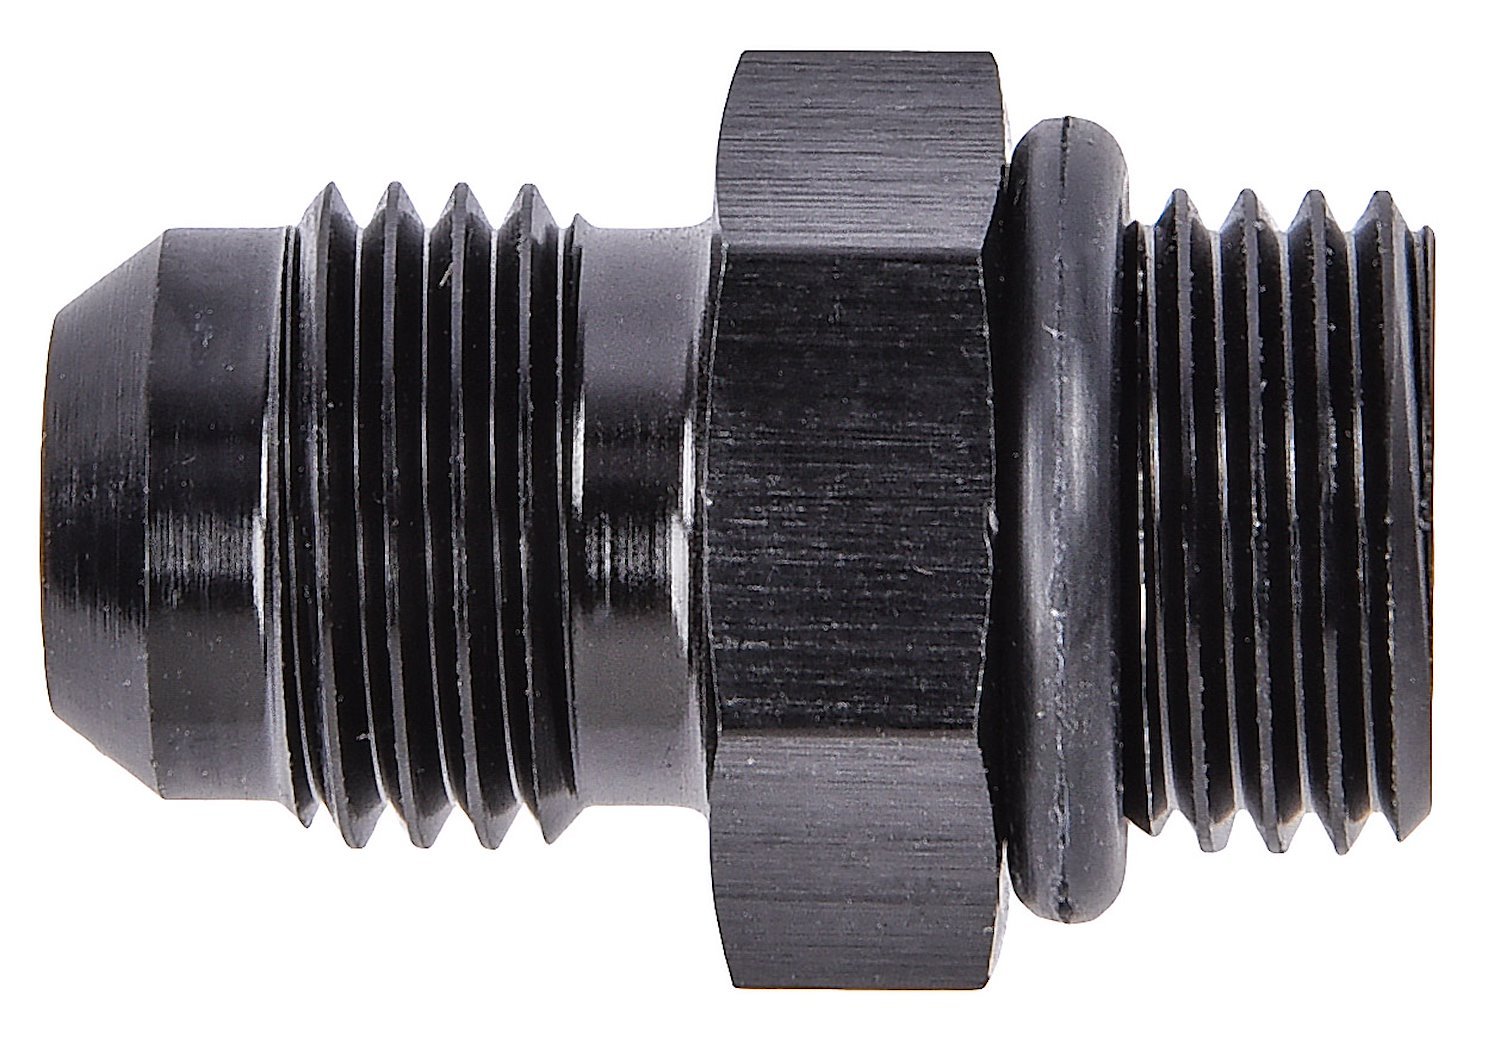 6 AN to -6 AN Hose Fitting | Shop for an Aluminum -6 AN to -6 AN Fitting  (9/16 in.-18 Thread) with Black Anodized Finish Online - JEGS